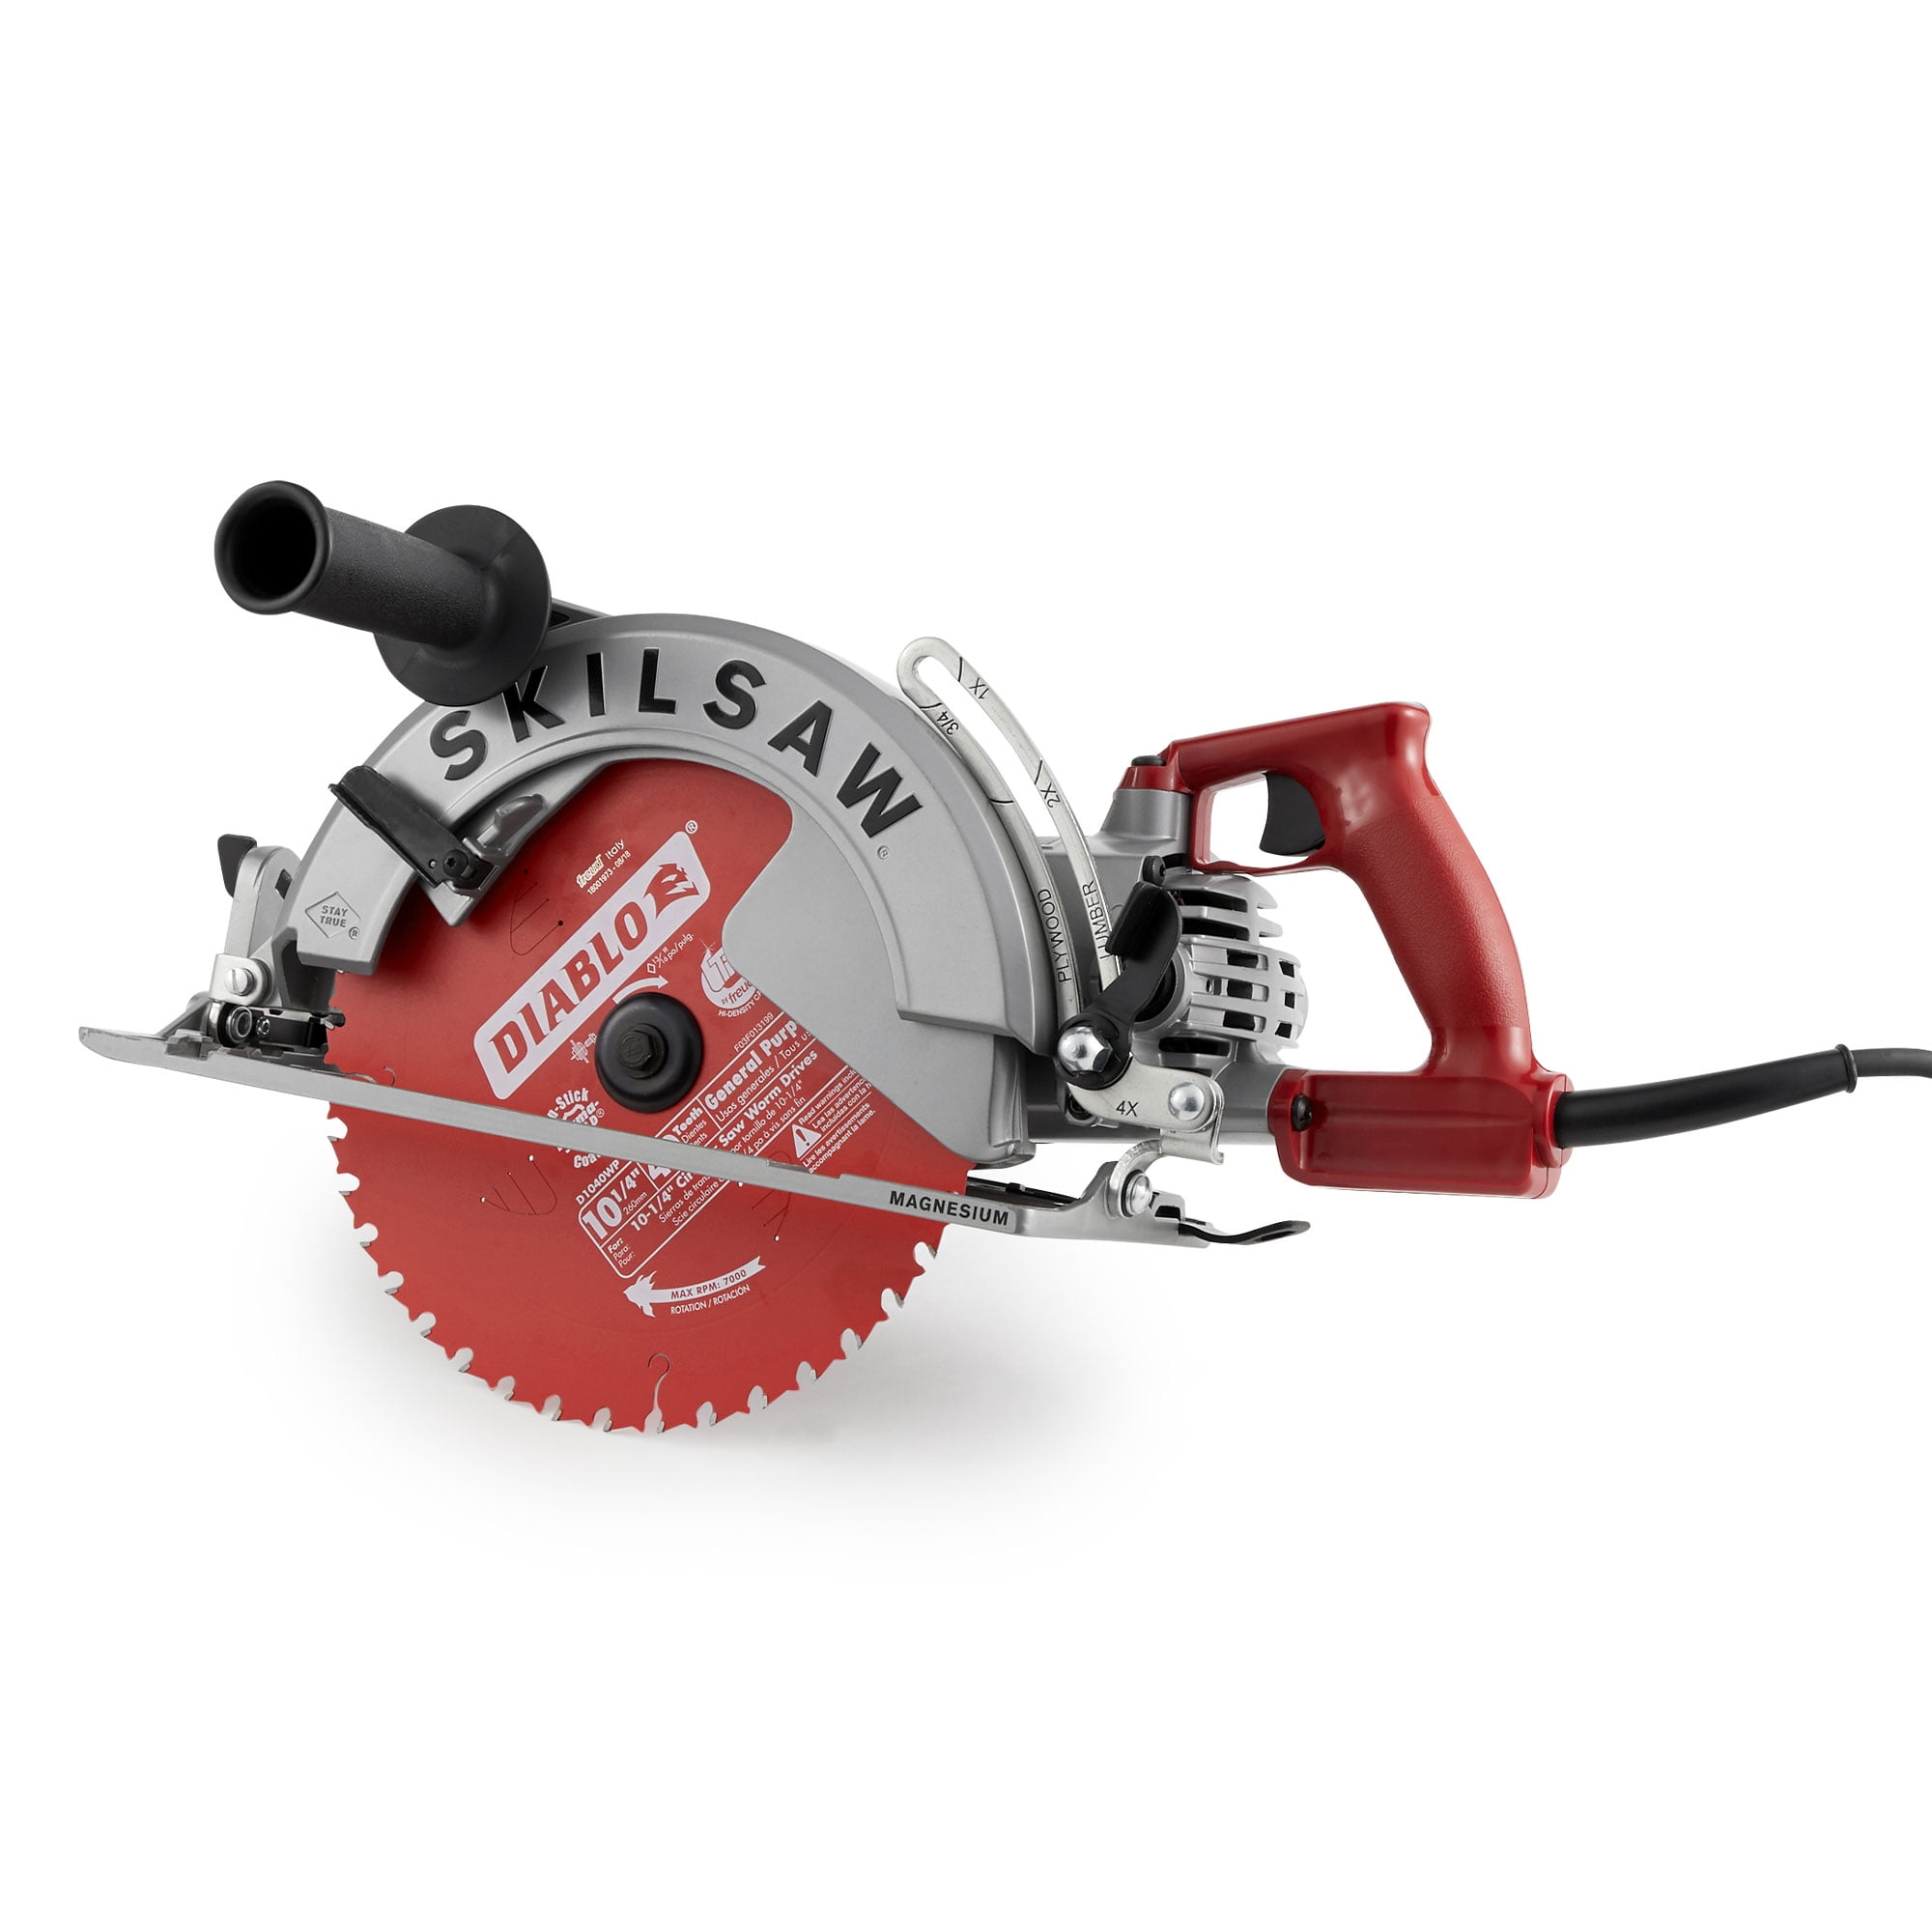 How to Safely Use a Worm Drive Circular Saw